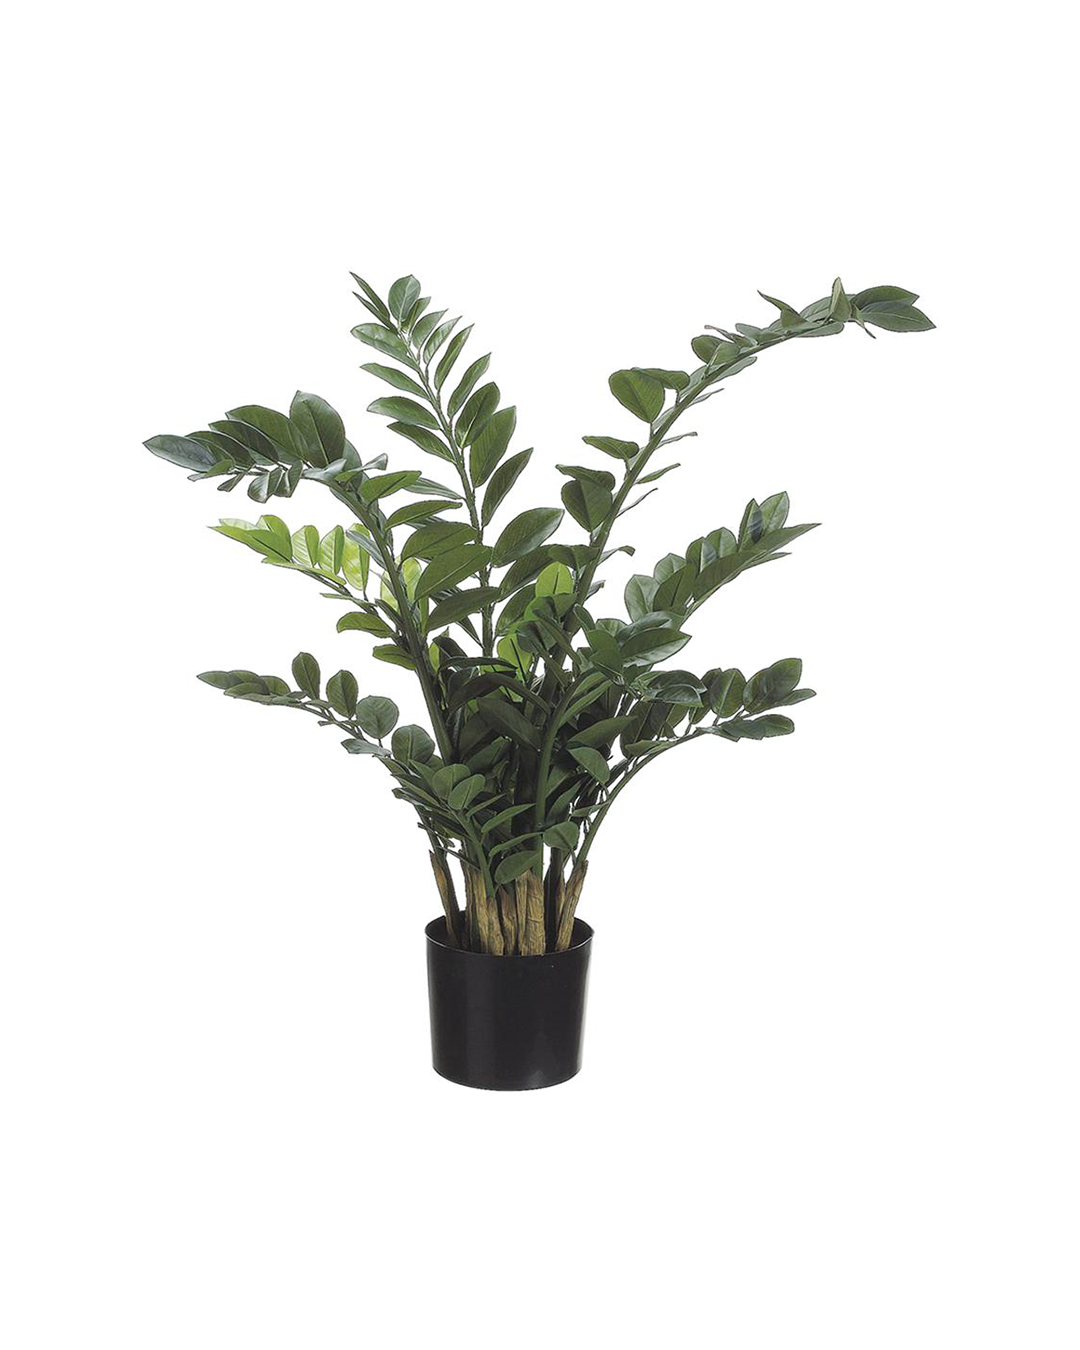 42" Zamioculcas Plant by AllState Floral And Craft with long, slender leaves in a plain black pot, isolated on a white background, perfect for a Scottsdale Arizona bungalow.